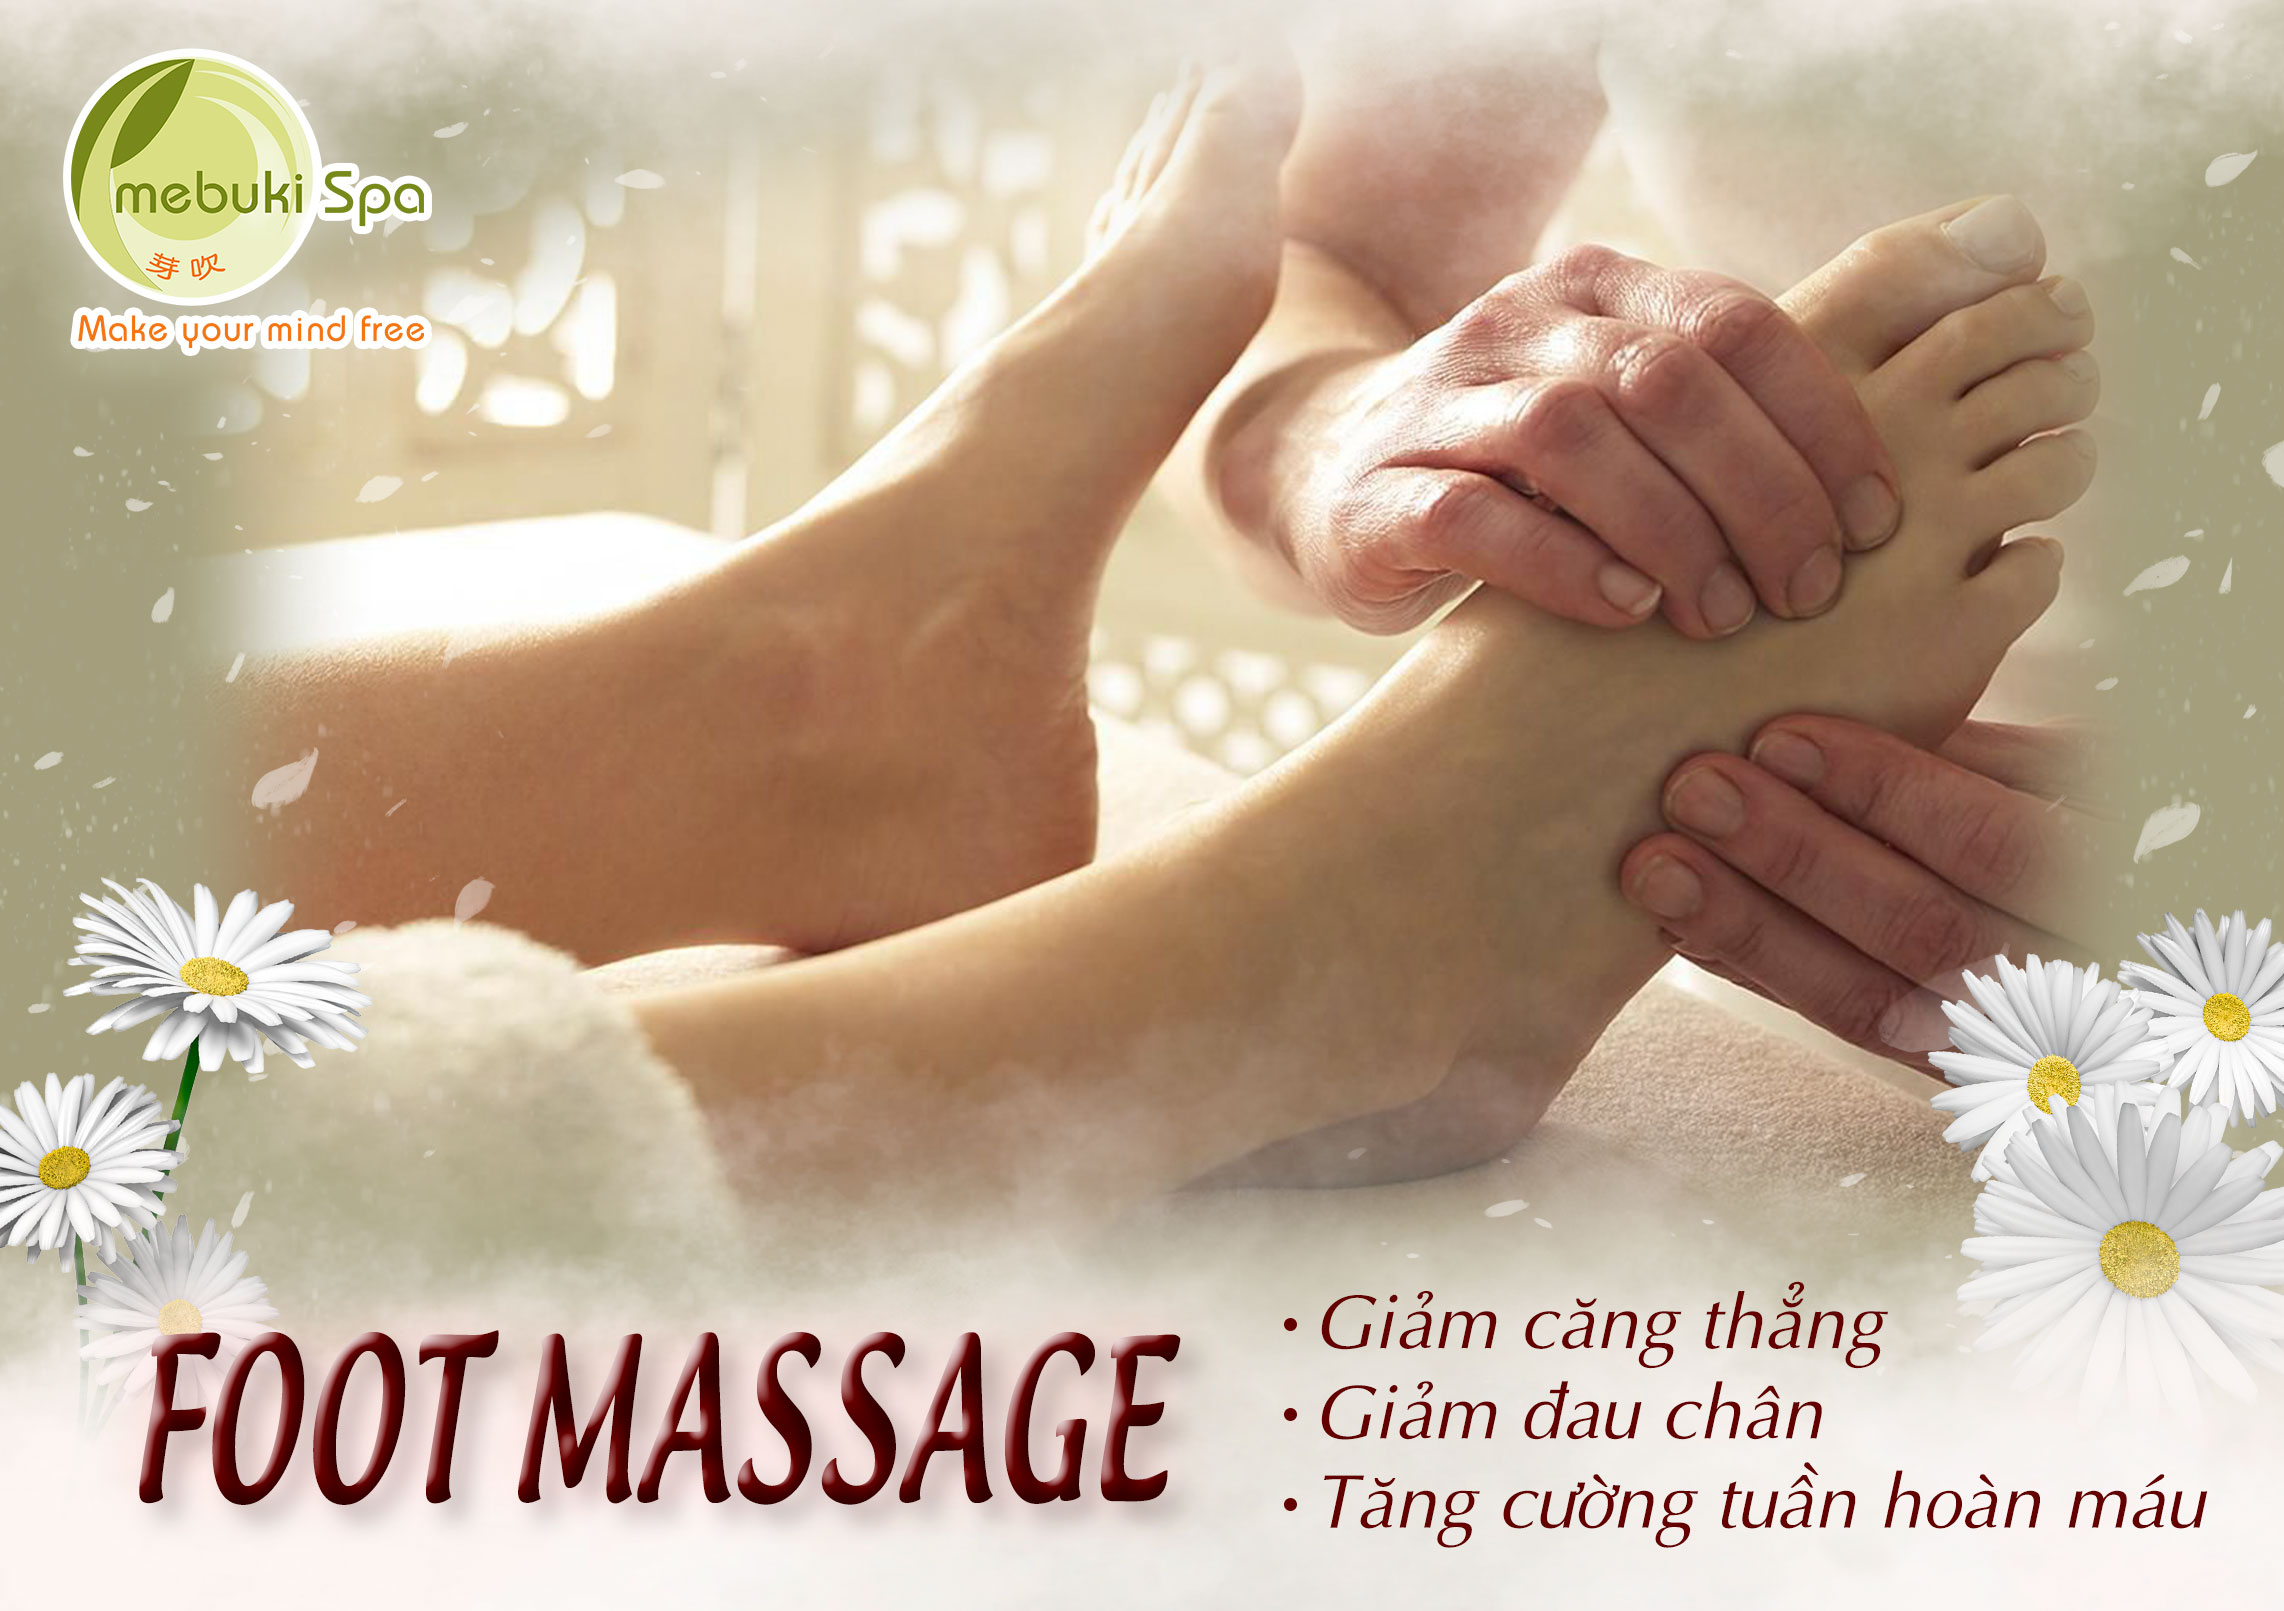 6 SECRETS TO FINDING A FOOT MASSAGE IN SAIGON